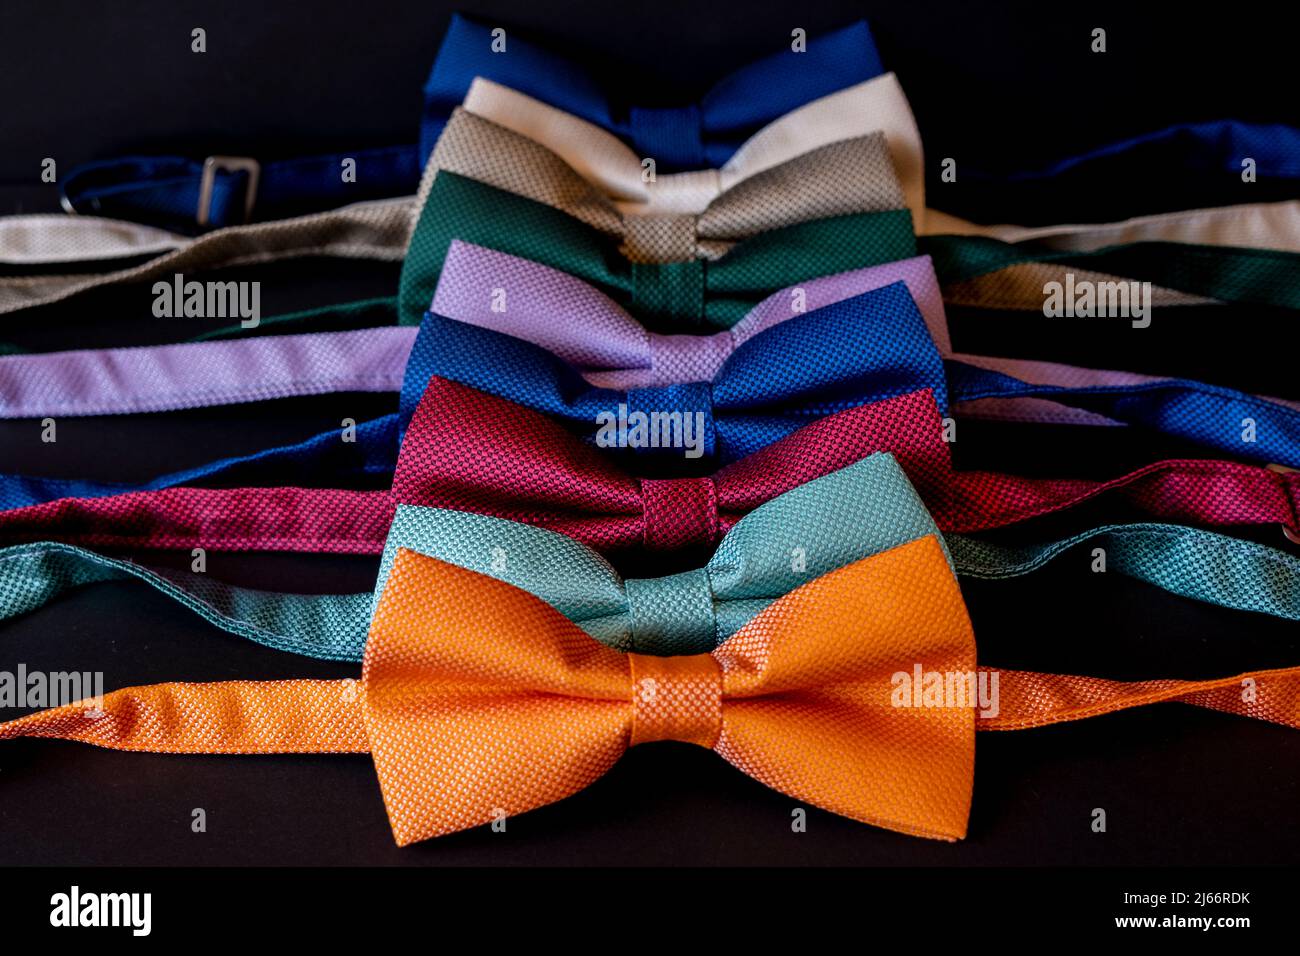 Colorful bow ties arranged in a row, man clothing accessory fashion concept, orange color necktie on the front, selective focus Stock Photo